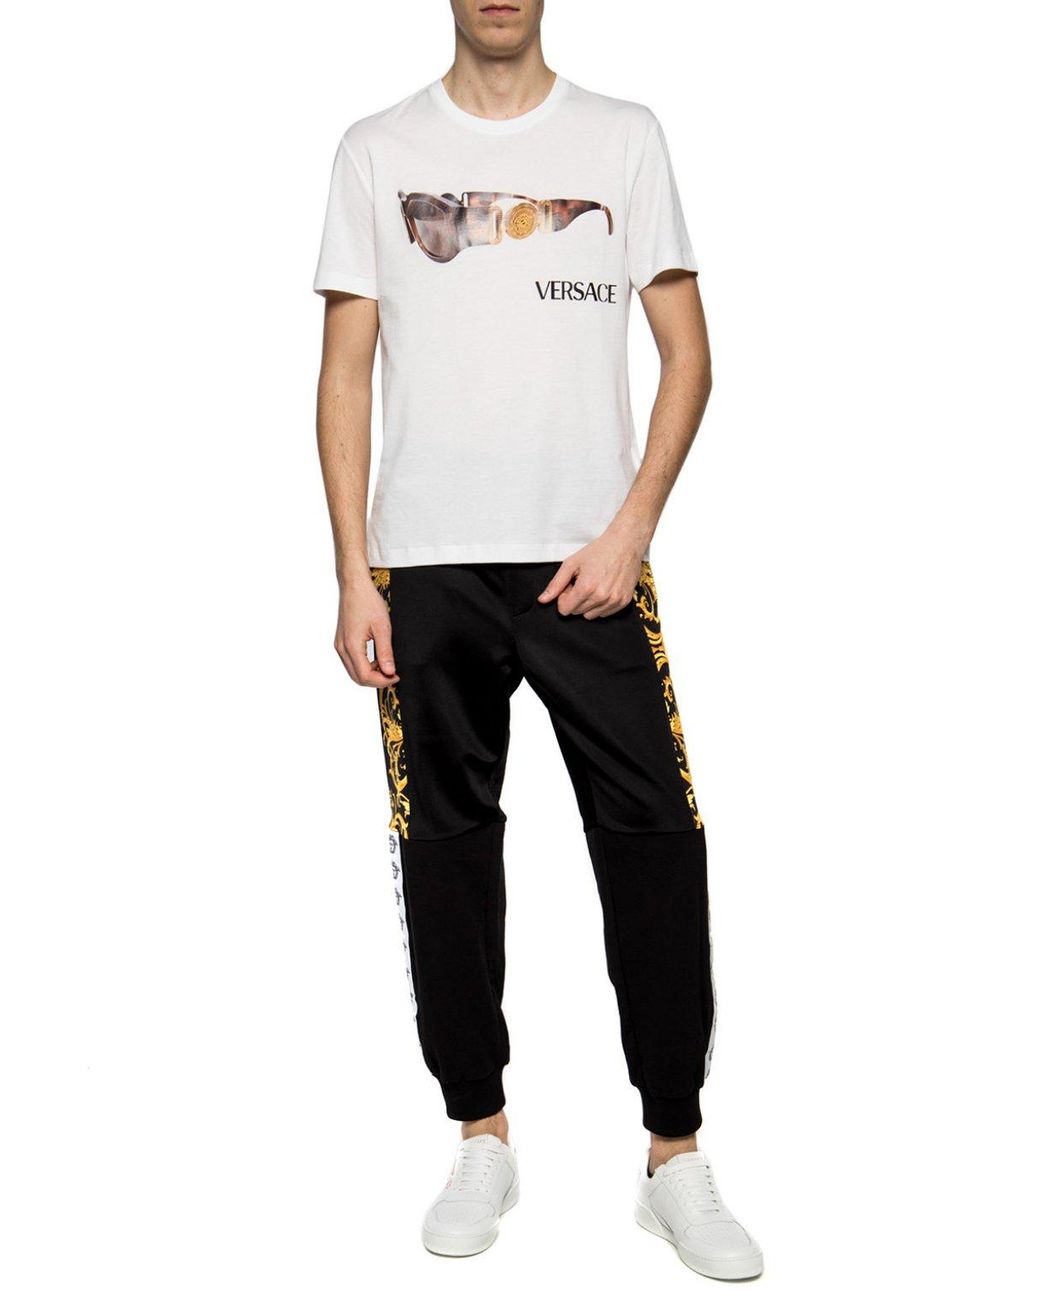 Versace Cotton T-shirt in White for Men - Save 27% - Lyst